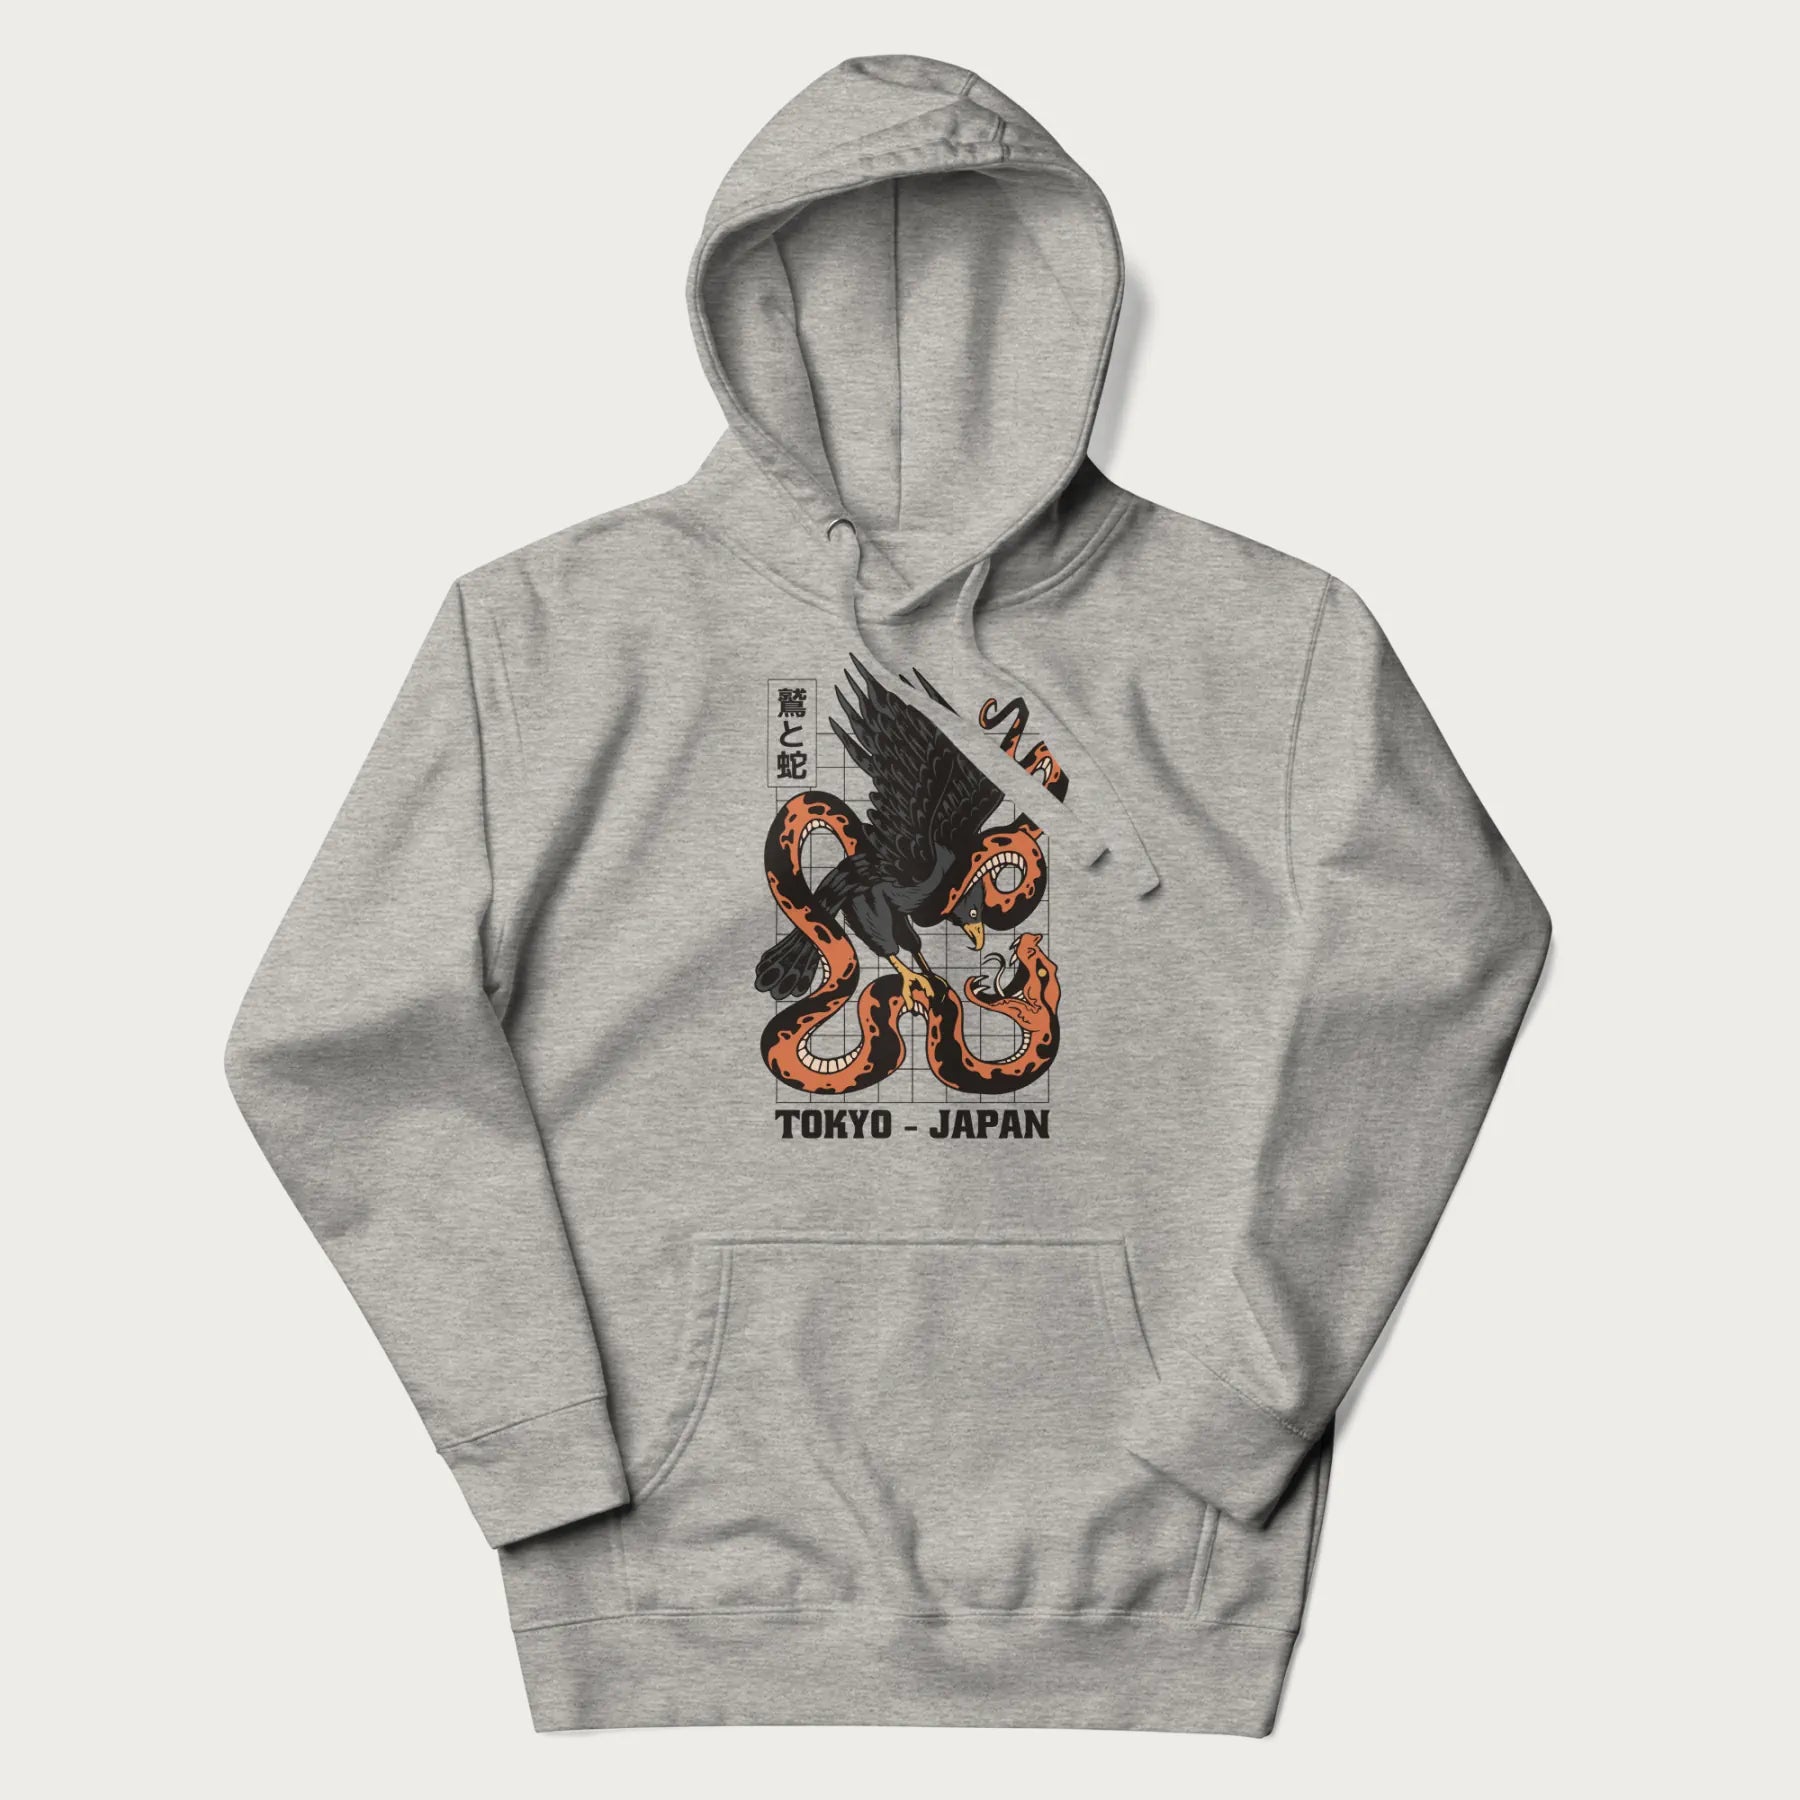 Light grey hoodie with Japanese text and a graphic of an eagle battling a snake, with the text 'Tokyo Japan' underneath.